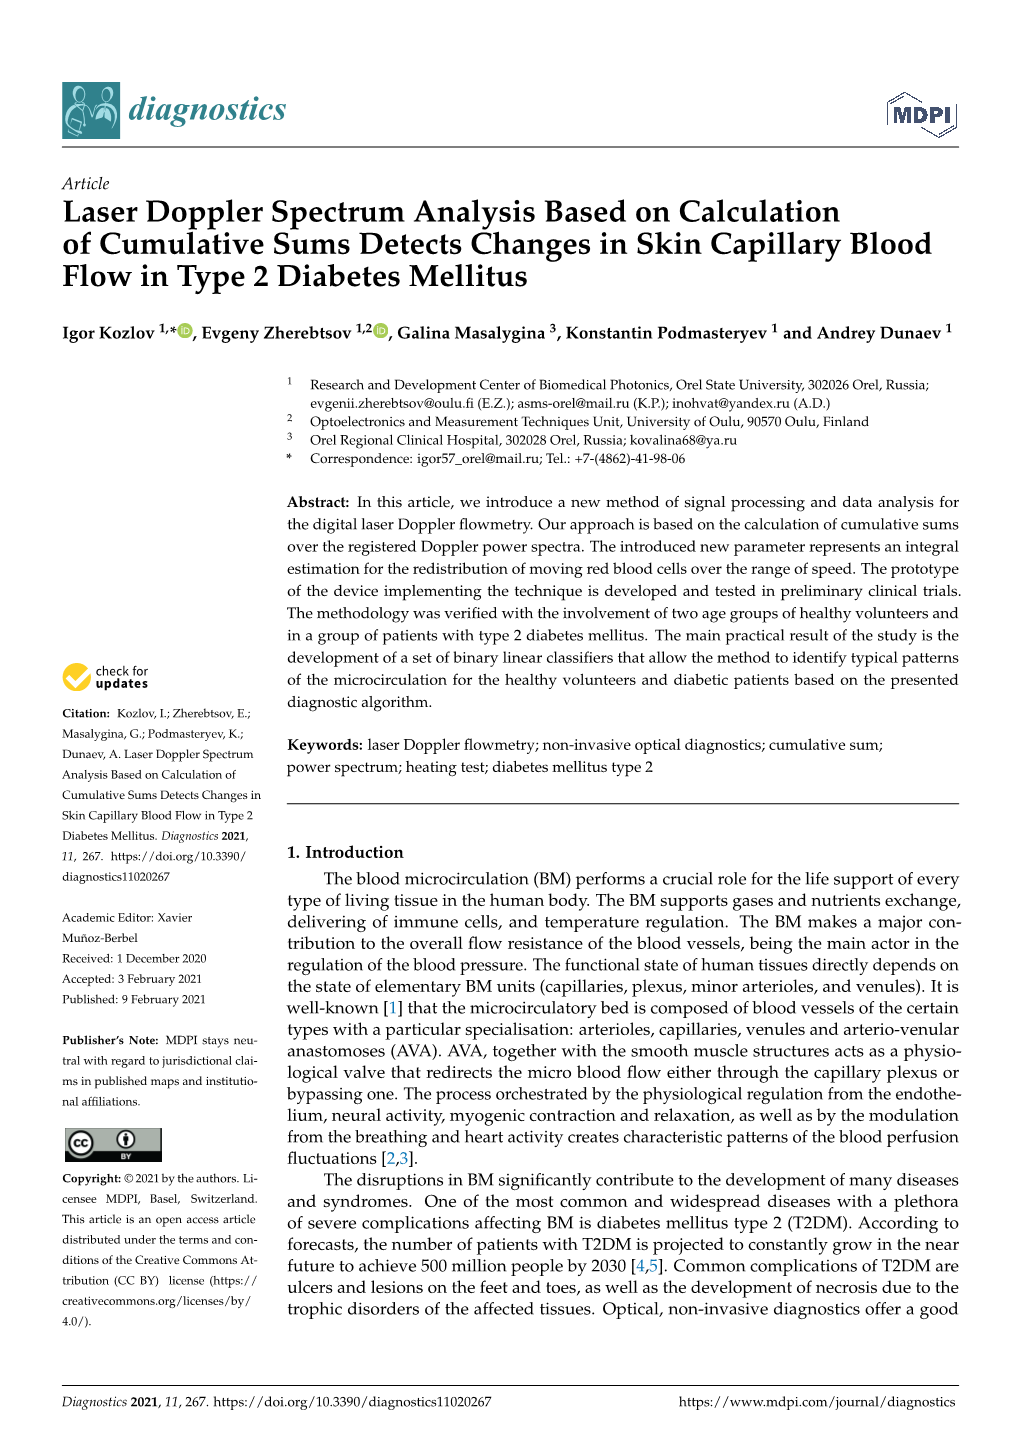 Laser Doppler Spectrum Analysis Based on Calculation of Cumulative Sums Detects Changes in Skin Capillary Blood Flow in Type 2 Diabetes Mellitus